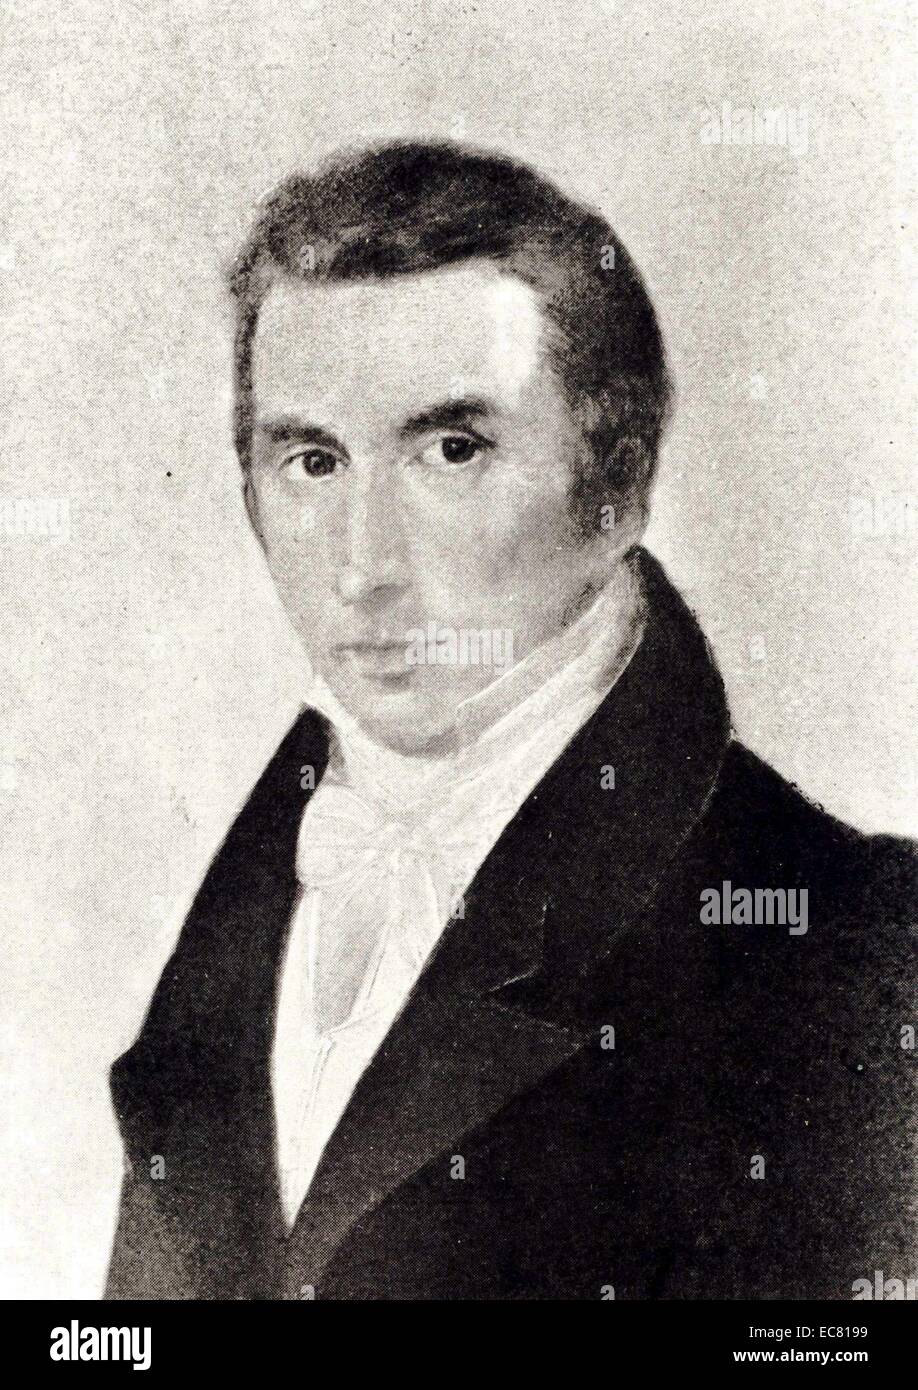 Nicholas Chopin (1771 – 1844) was a teacher of French language in Prussian- and Russian-ruled Poland, and father of Polish composer Frédéric Chopin. Stock Photo